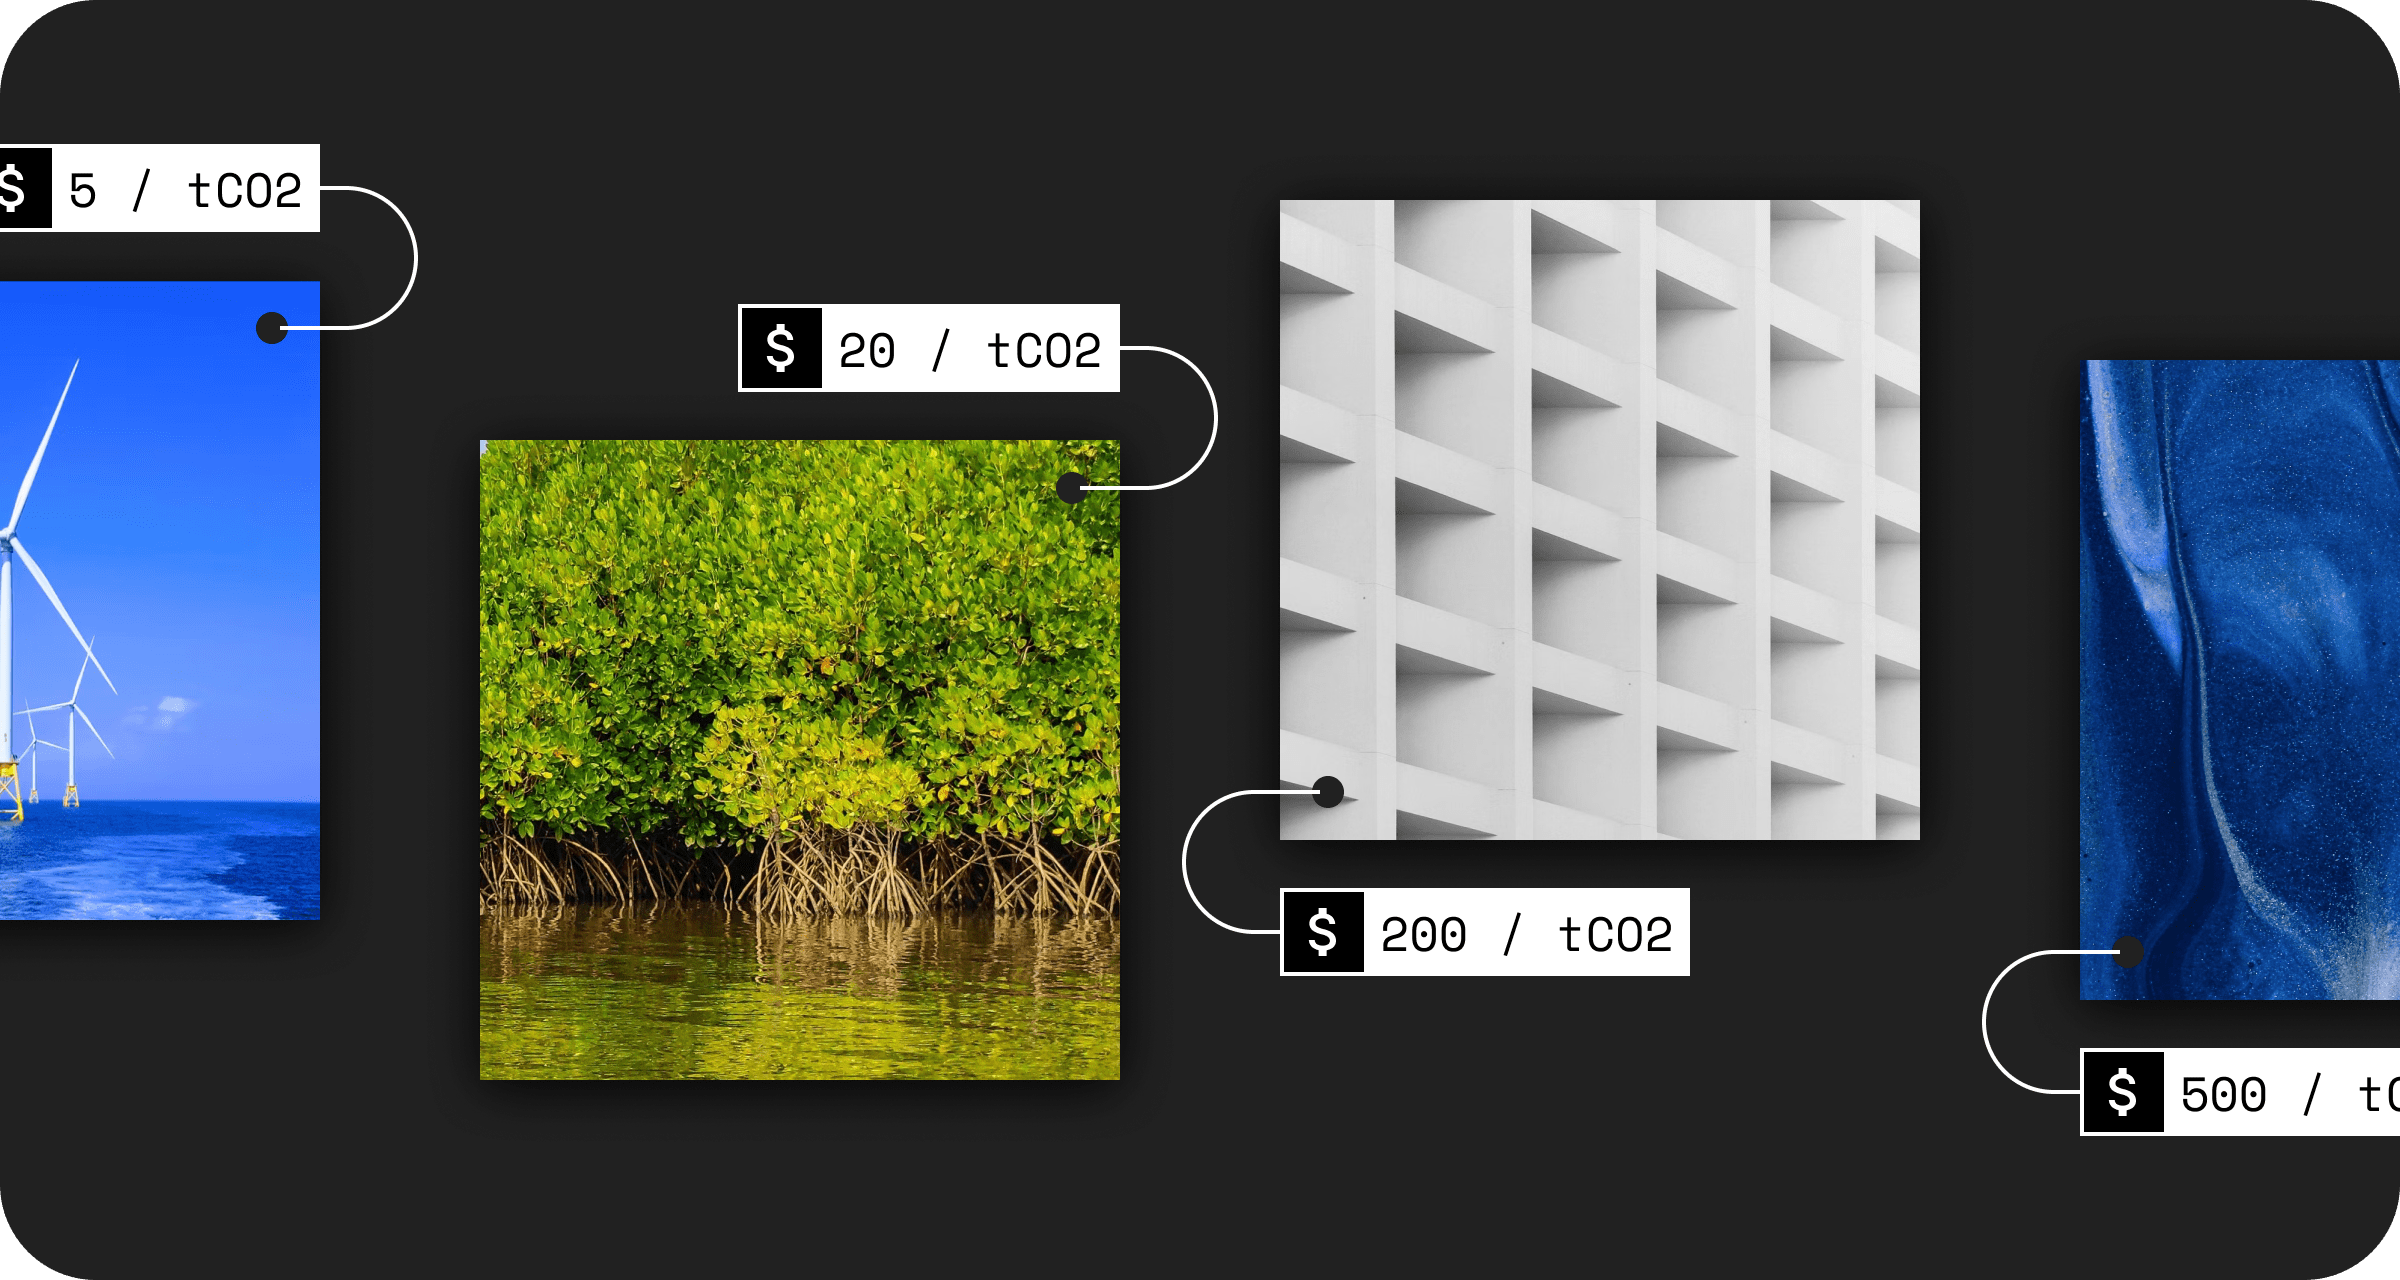 Photo of a mangrove forest with $20 per tCO2; image of concrete mineralisation with $200 per tCO2